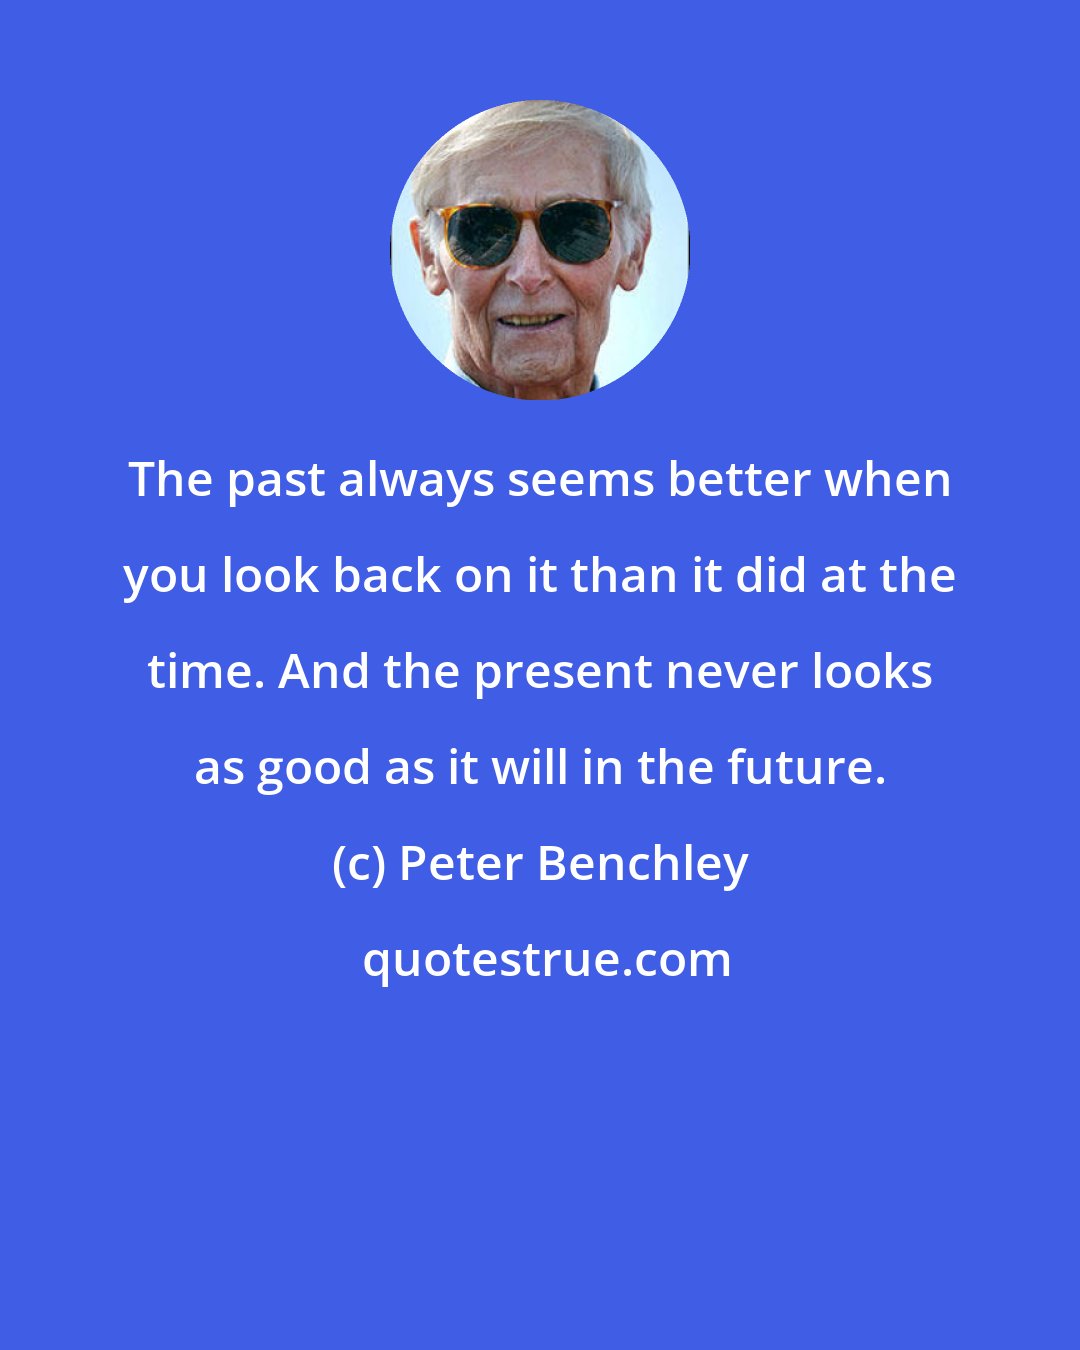 Peter Benchley: The past always seems better when you look back on it than it did at the time. And the present never looks as good as it will in the future.